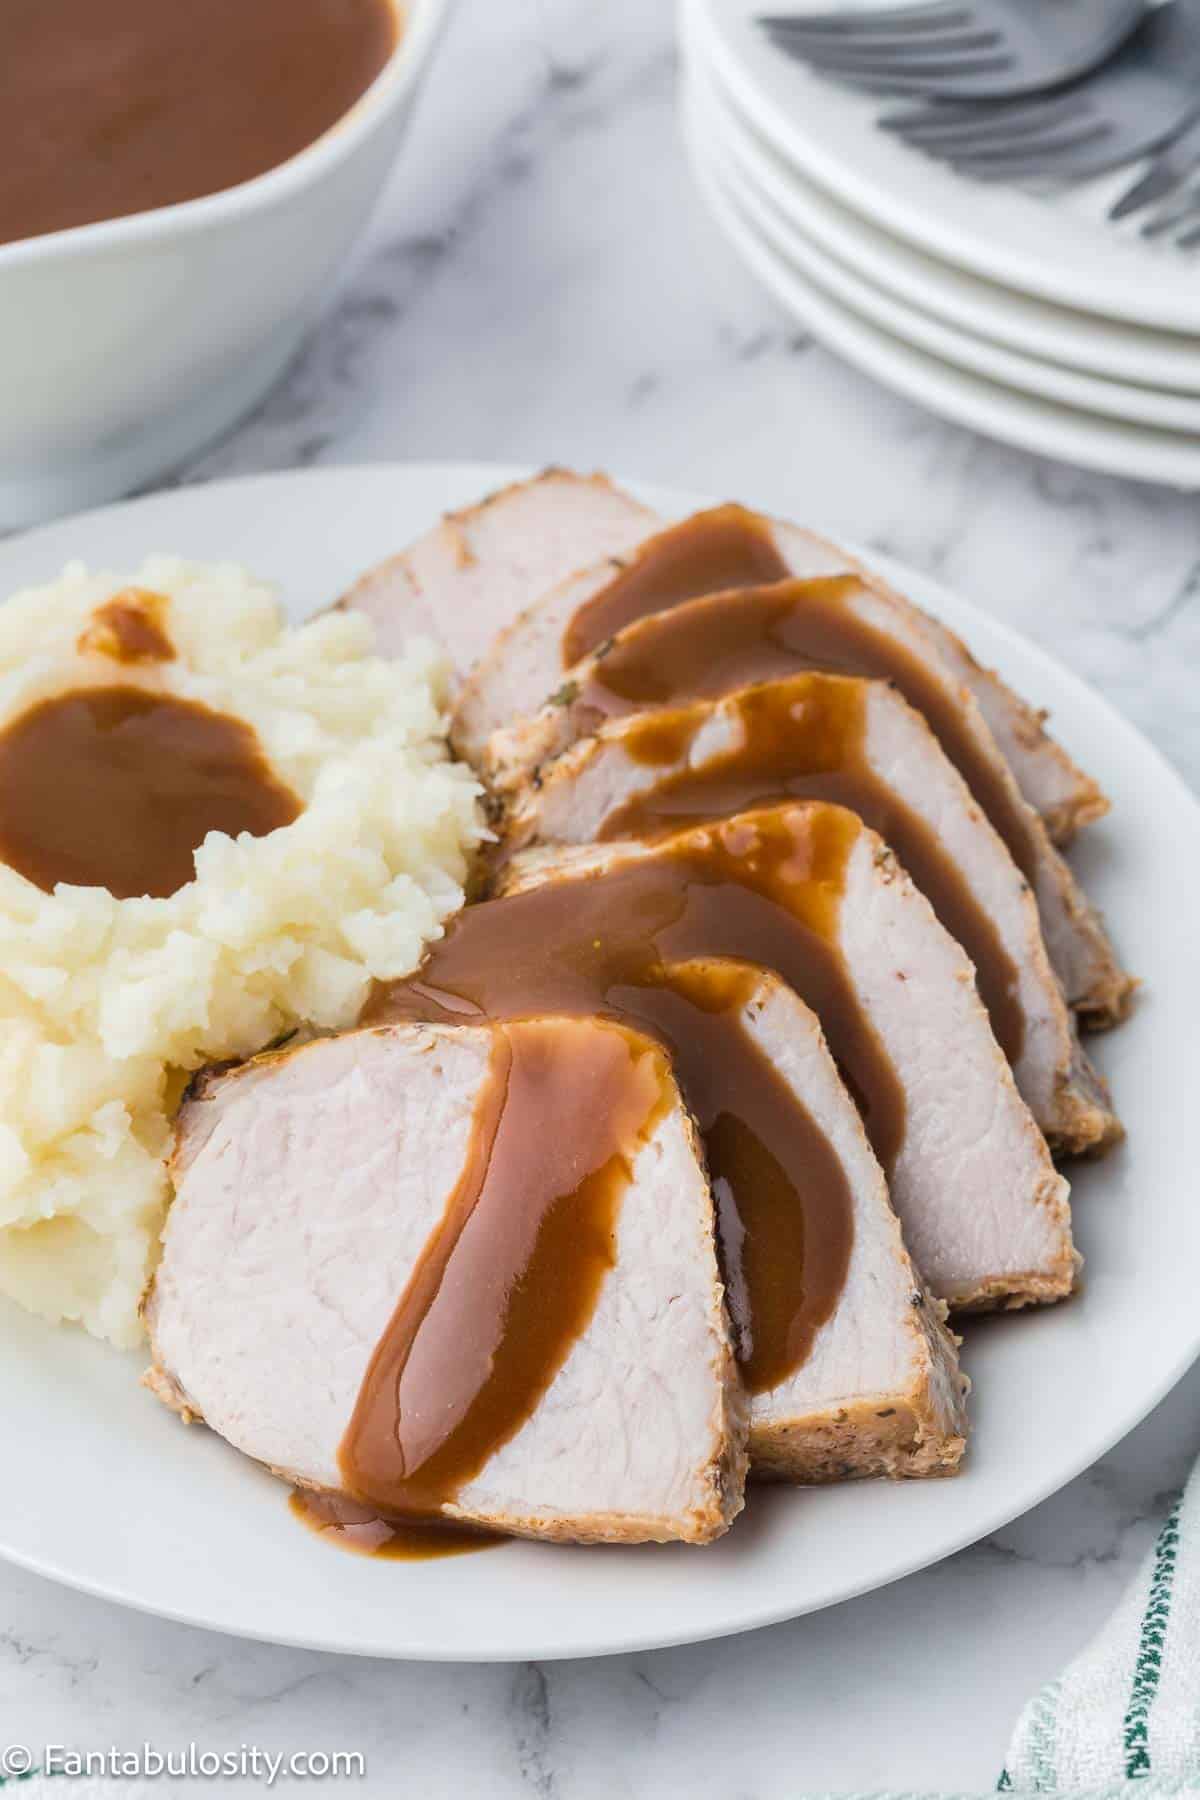 Pork gravy drizzled over cooked pork loin, sitting on white plate.